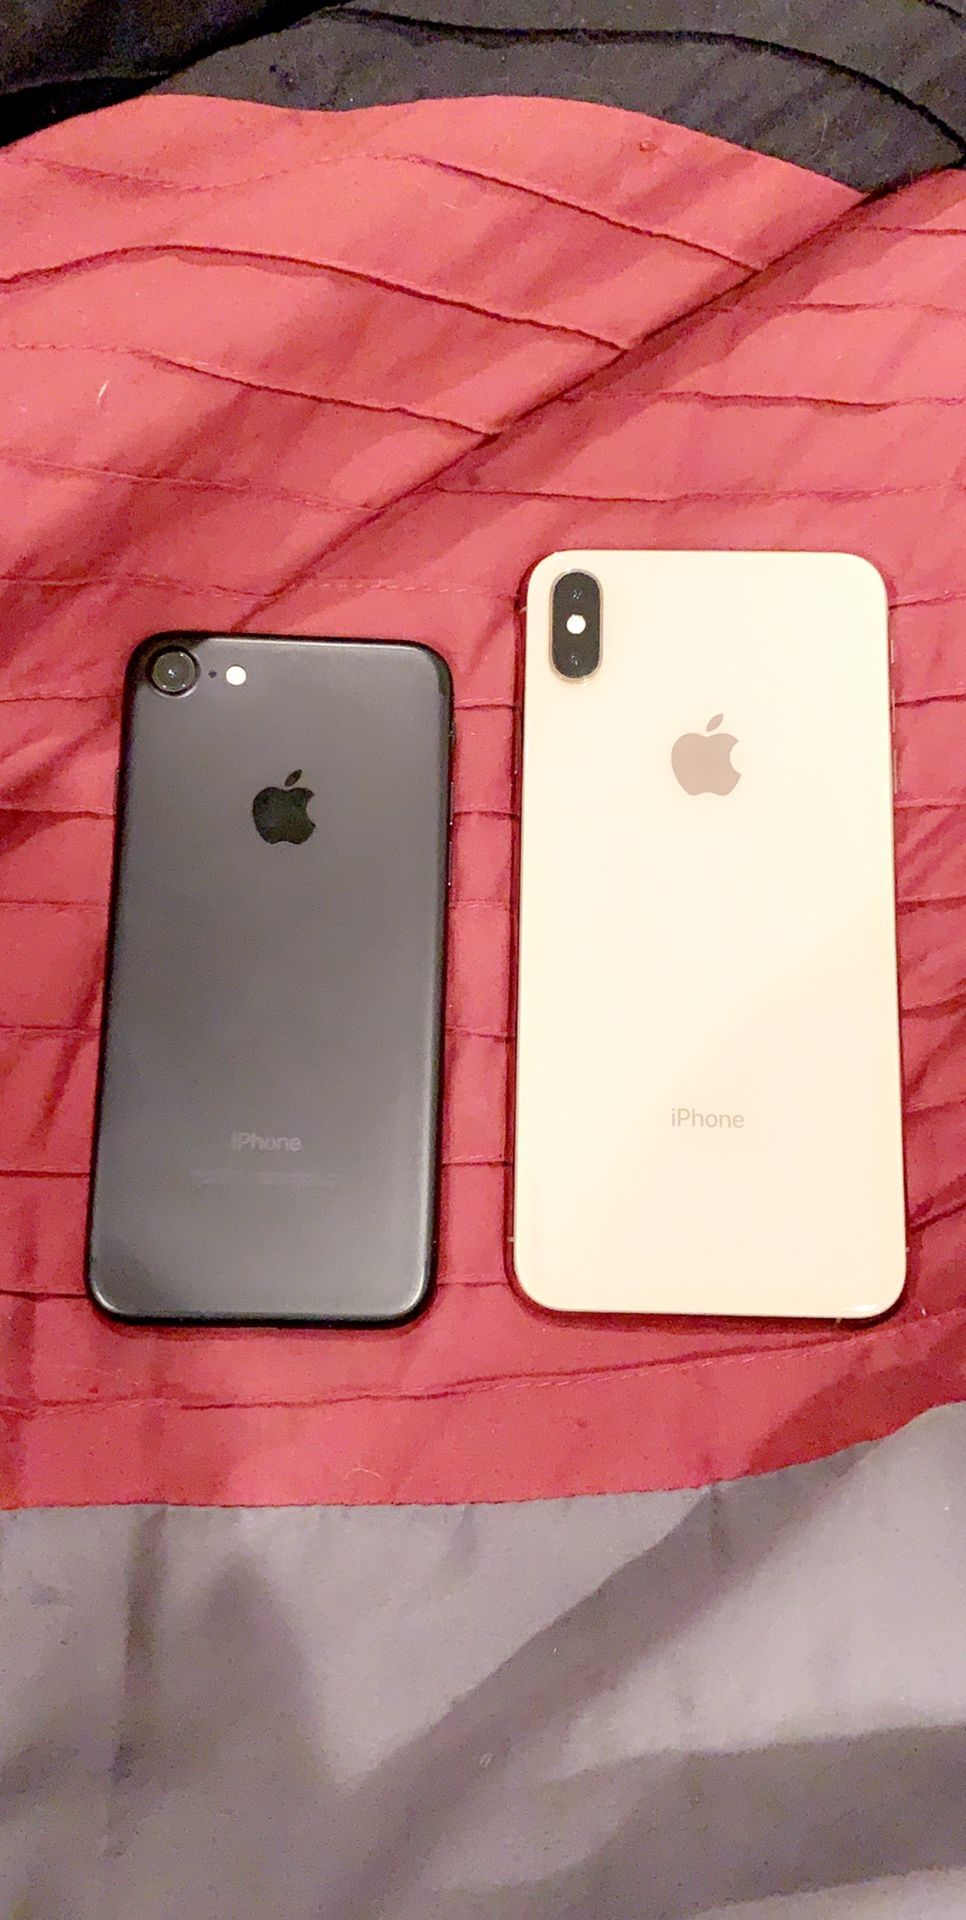 IPHONE XS MAX 256GB AND IPHONE 7 256GB